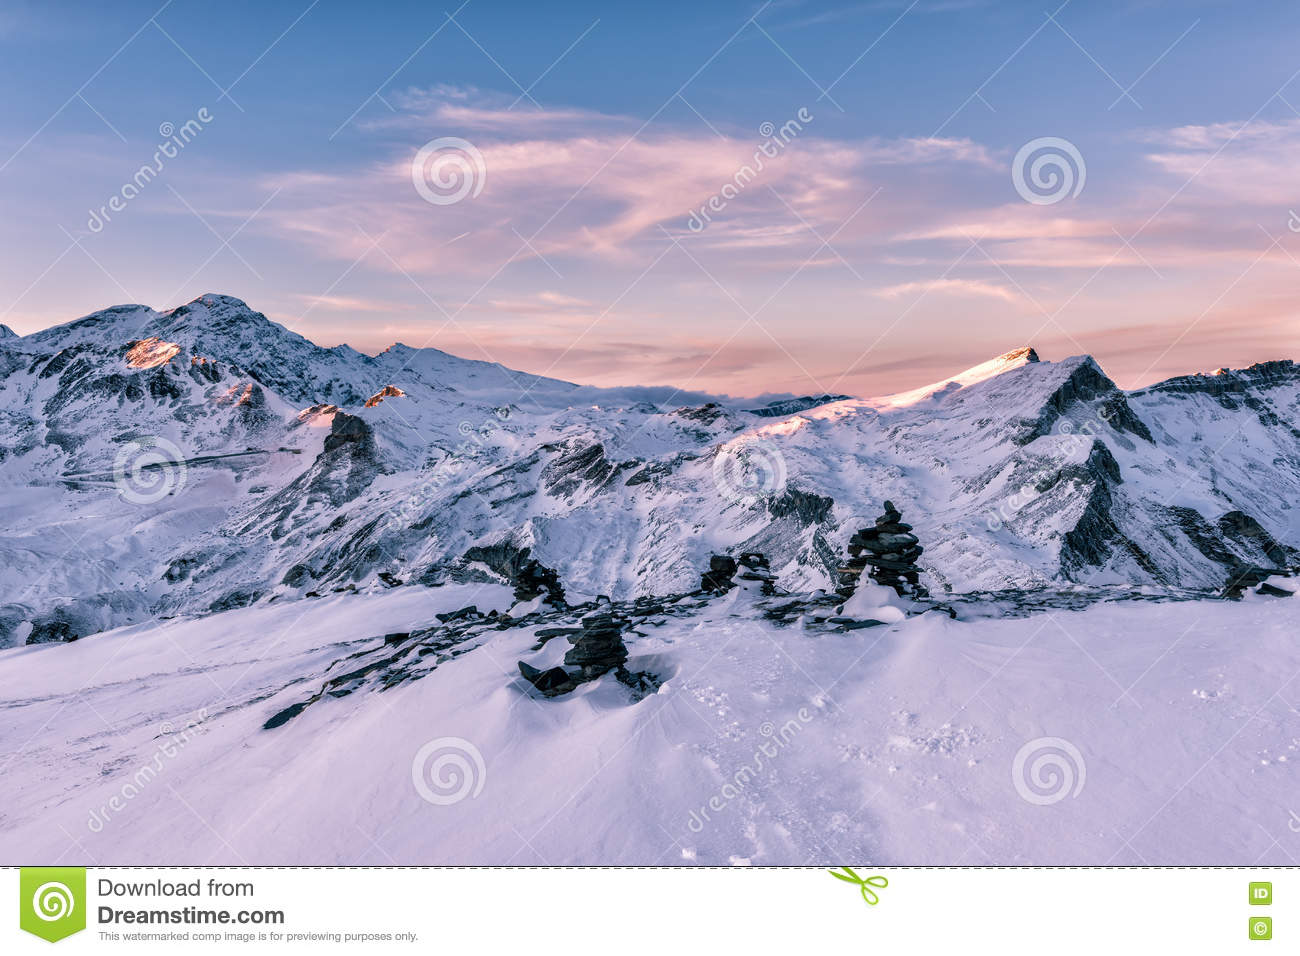 Gentle Pink Sunset Light At Winter Alps Mountains Stock Photo.